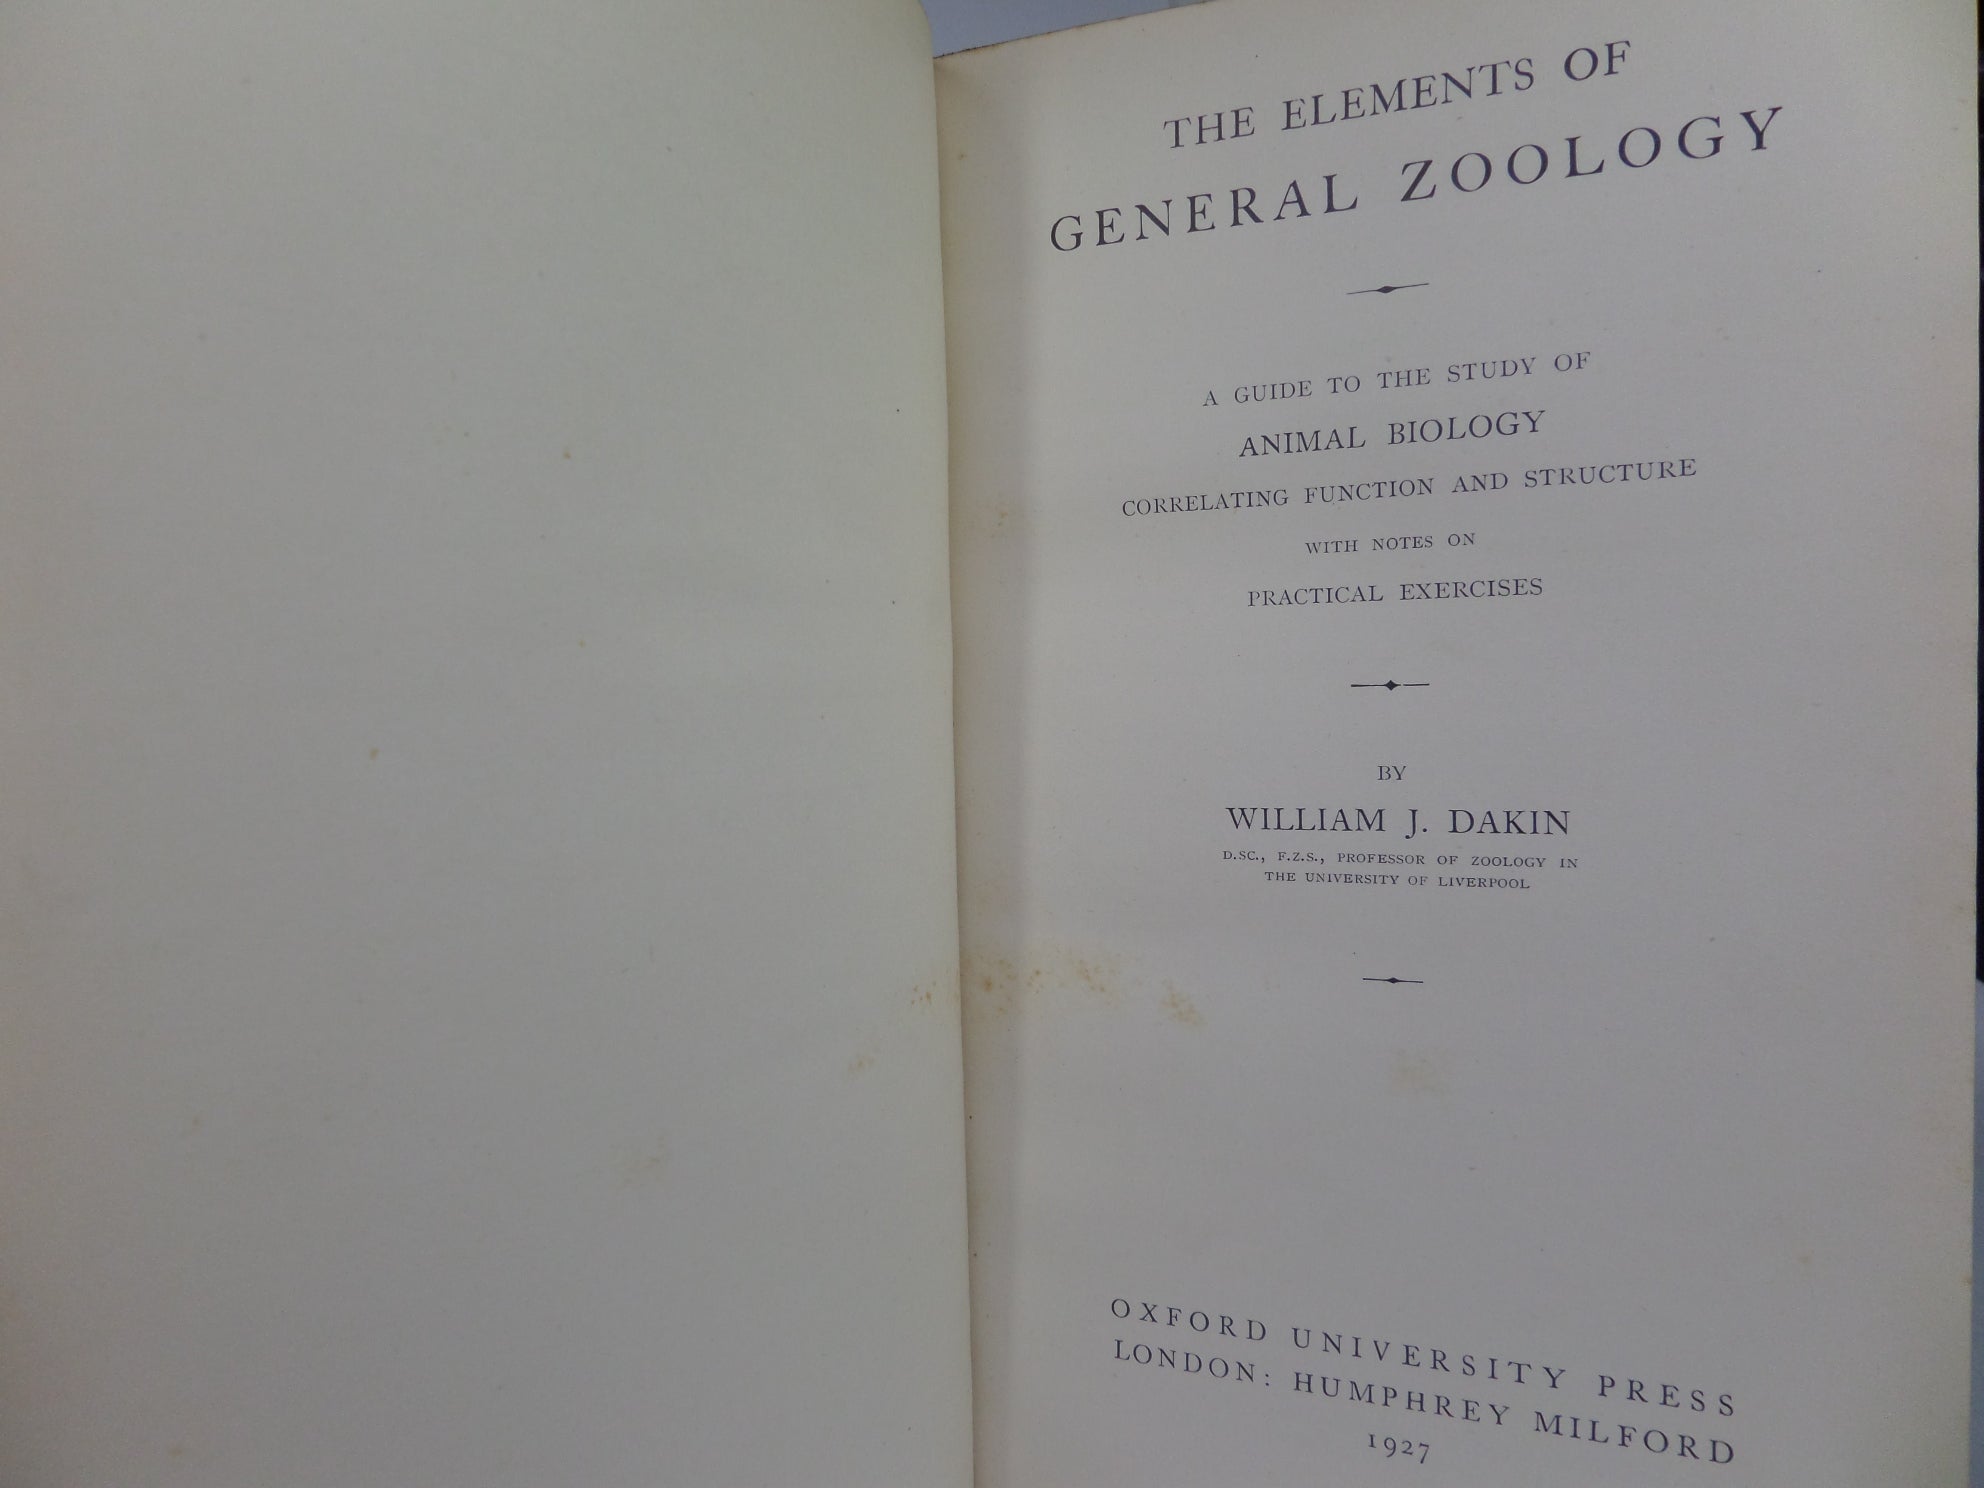 THE ELEMENTS OF GENERAL ZOOLOGY BY WILLIAM J. DAKIN 1927 LEATHER BINDING